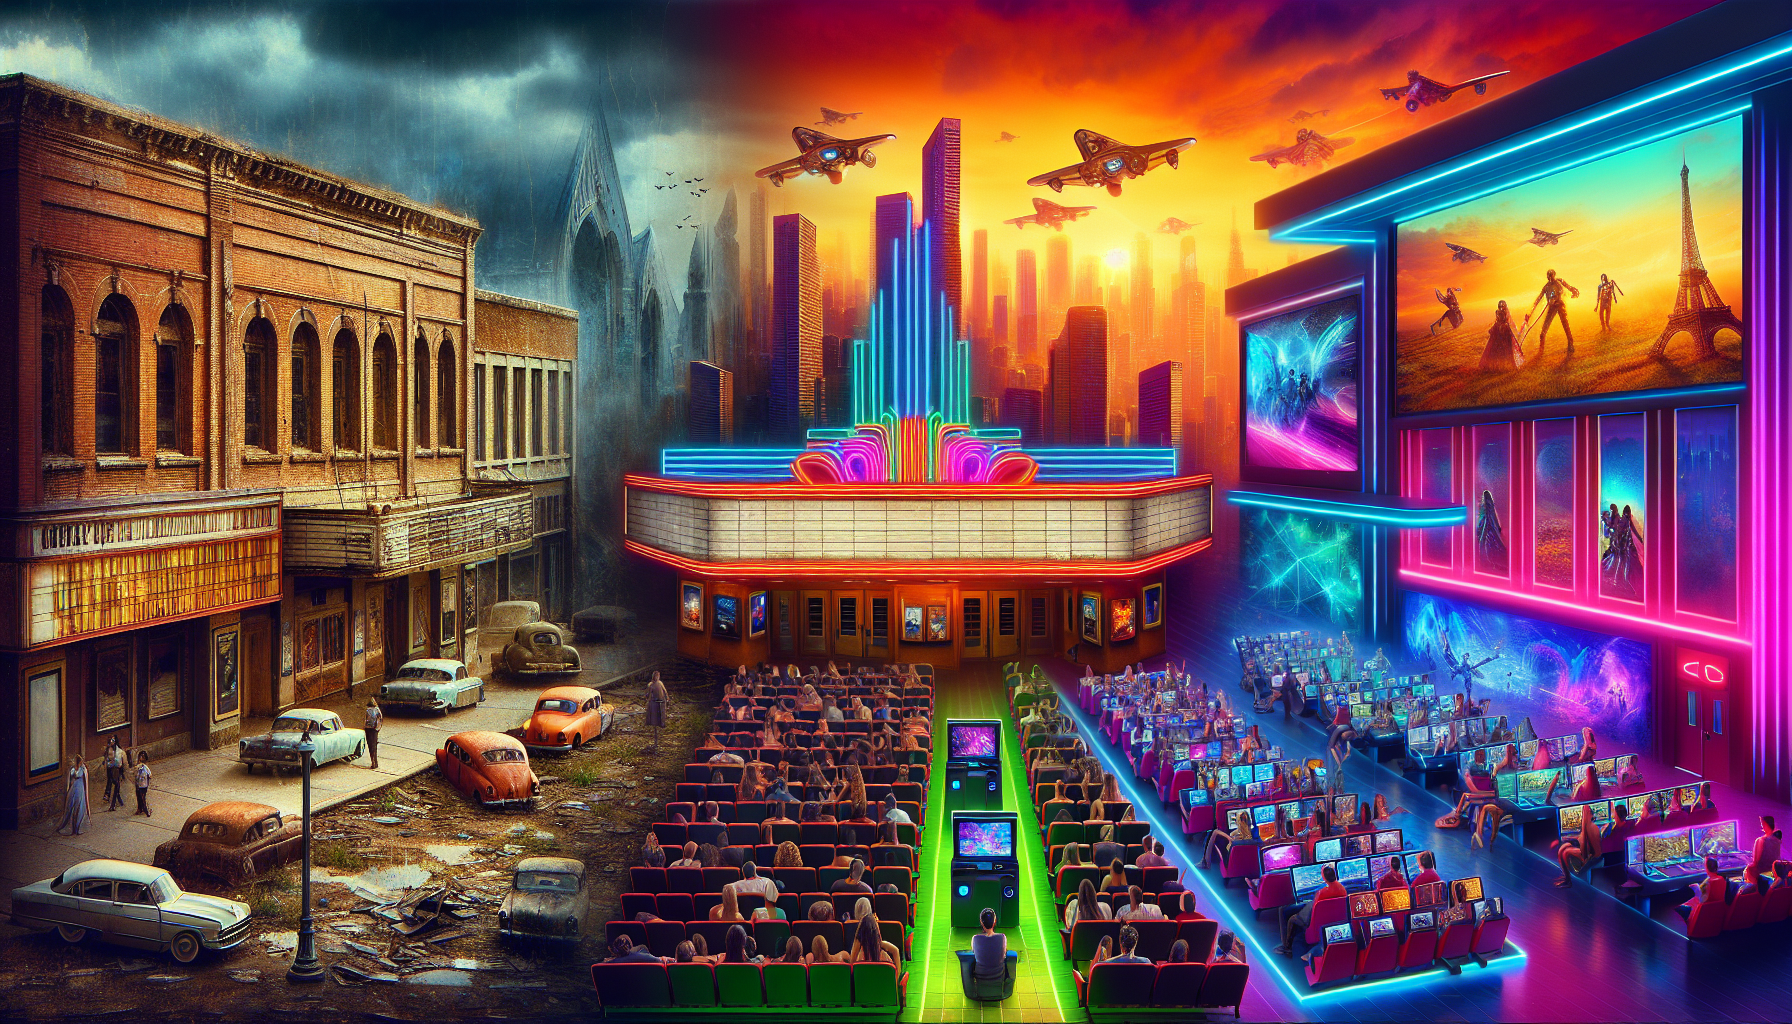 Digital landscape featuring abandoned movie theaters alongside bustling virtual reality and streaming entertainment hubs, illustrating the transition into the post-cinema era.